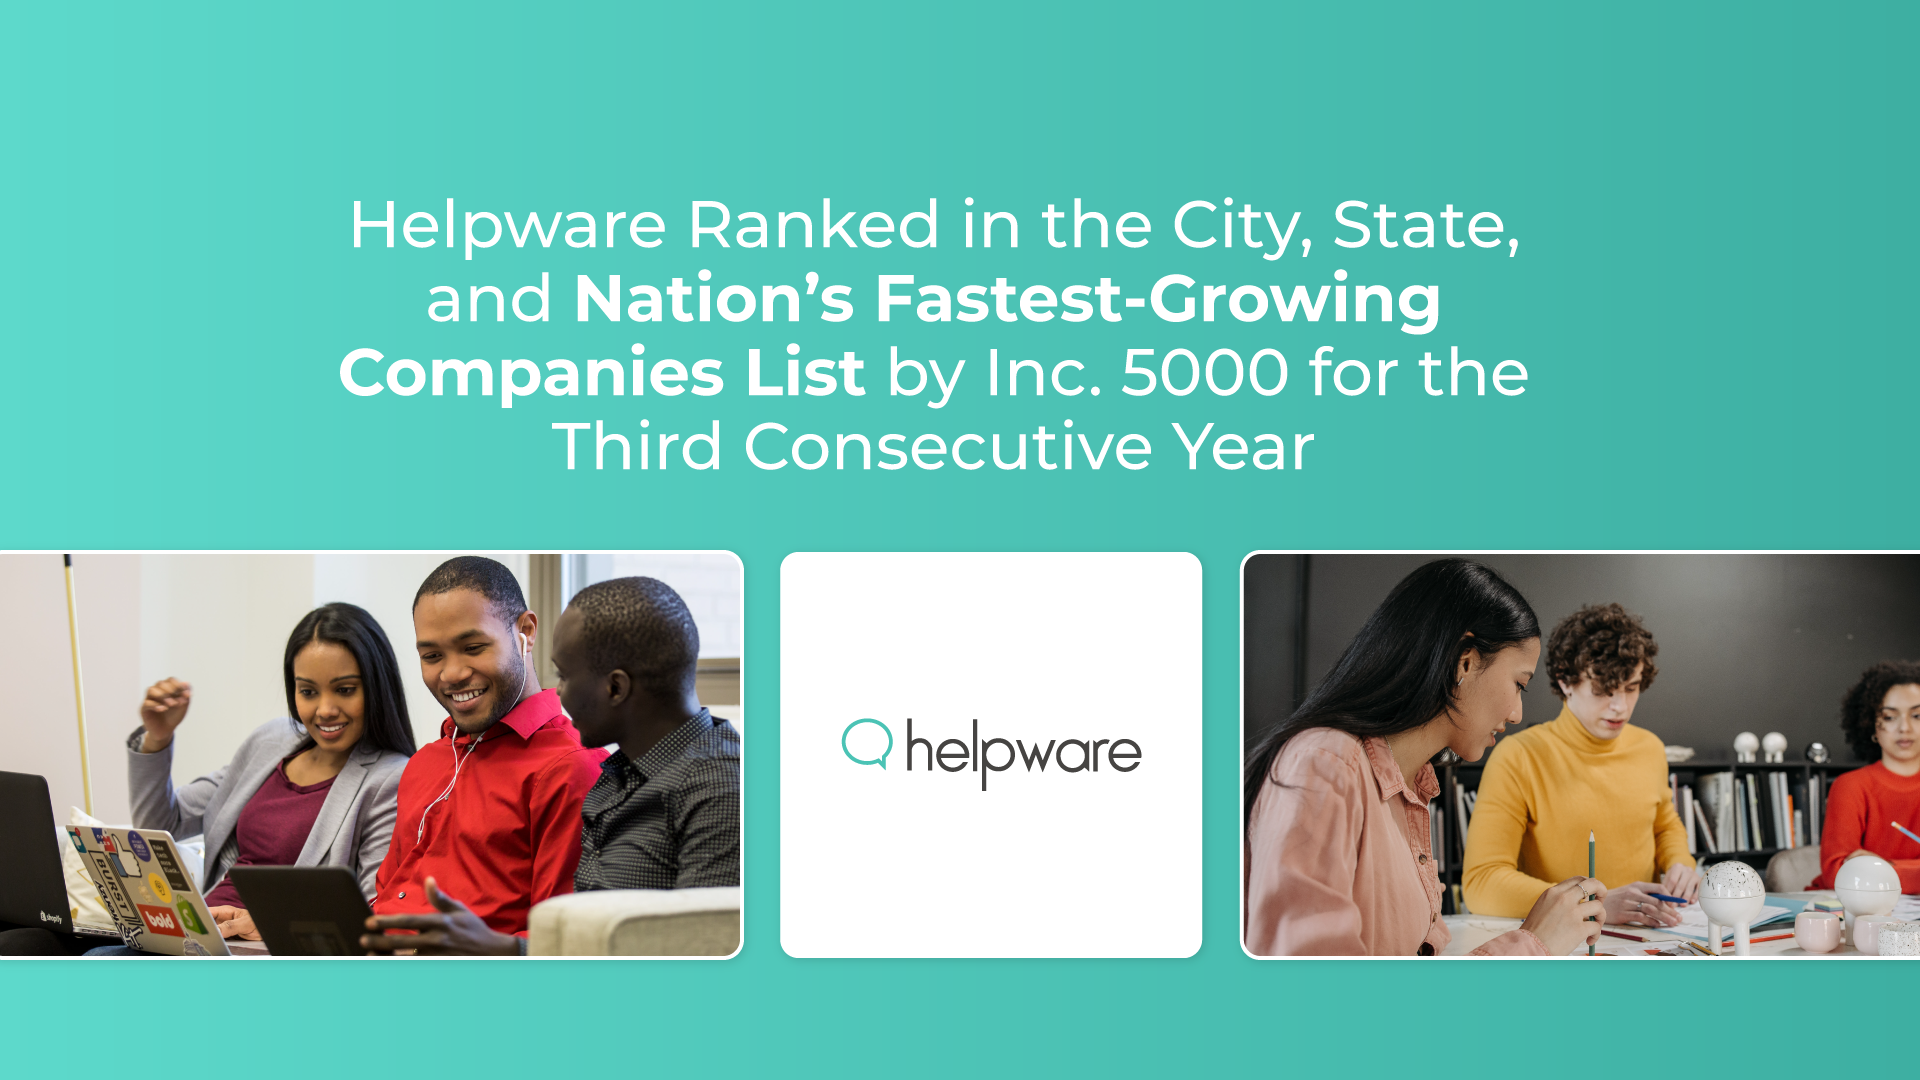 Helpware Ranked in the City, State, and Nation’s Fastest-Growing Companies List by Inc. 5000 for the Third Consecutive Year